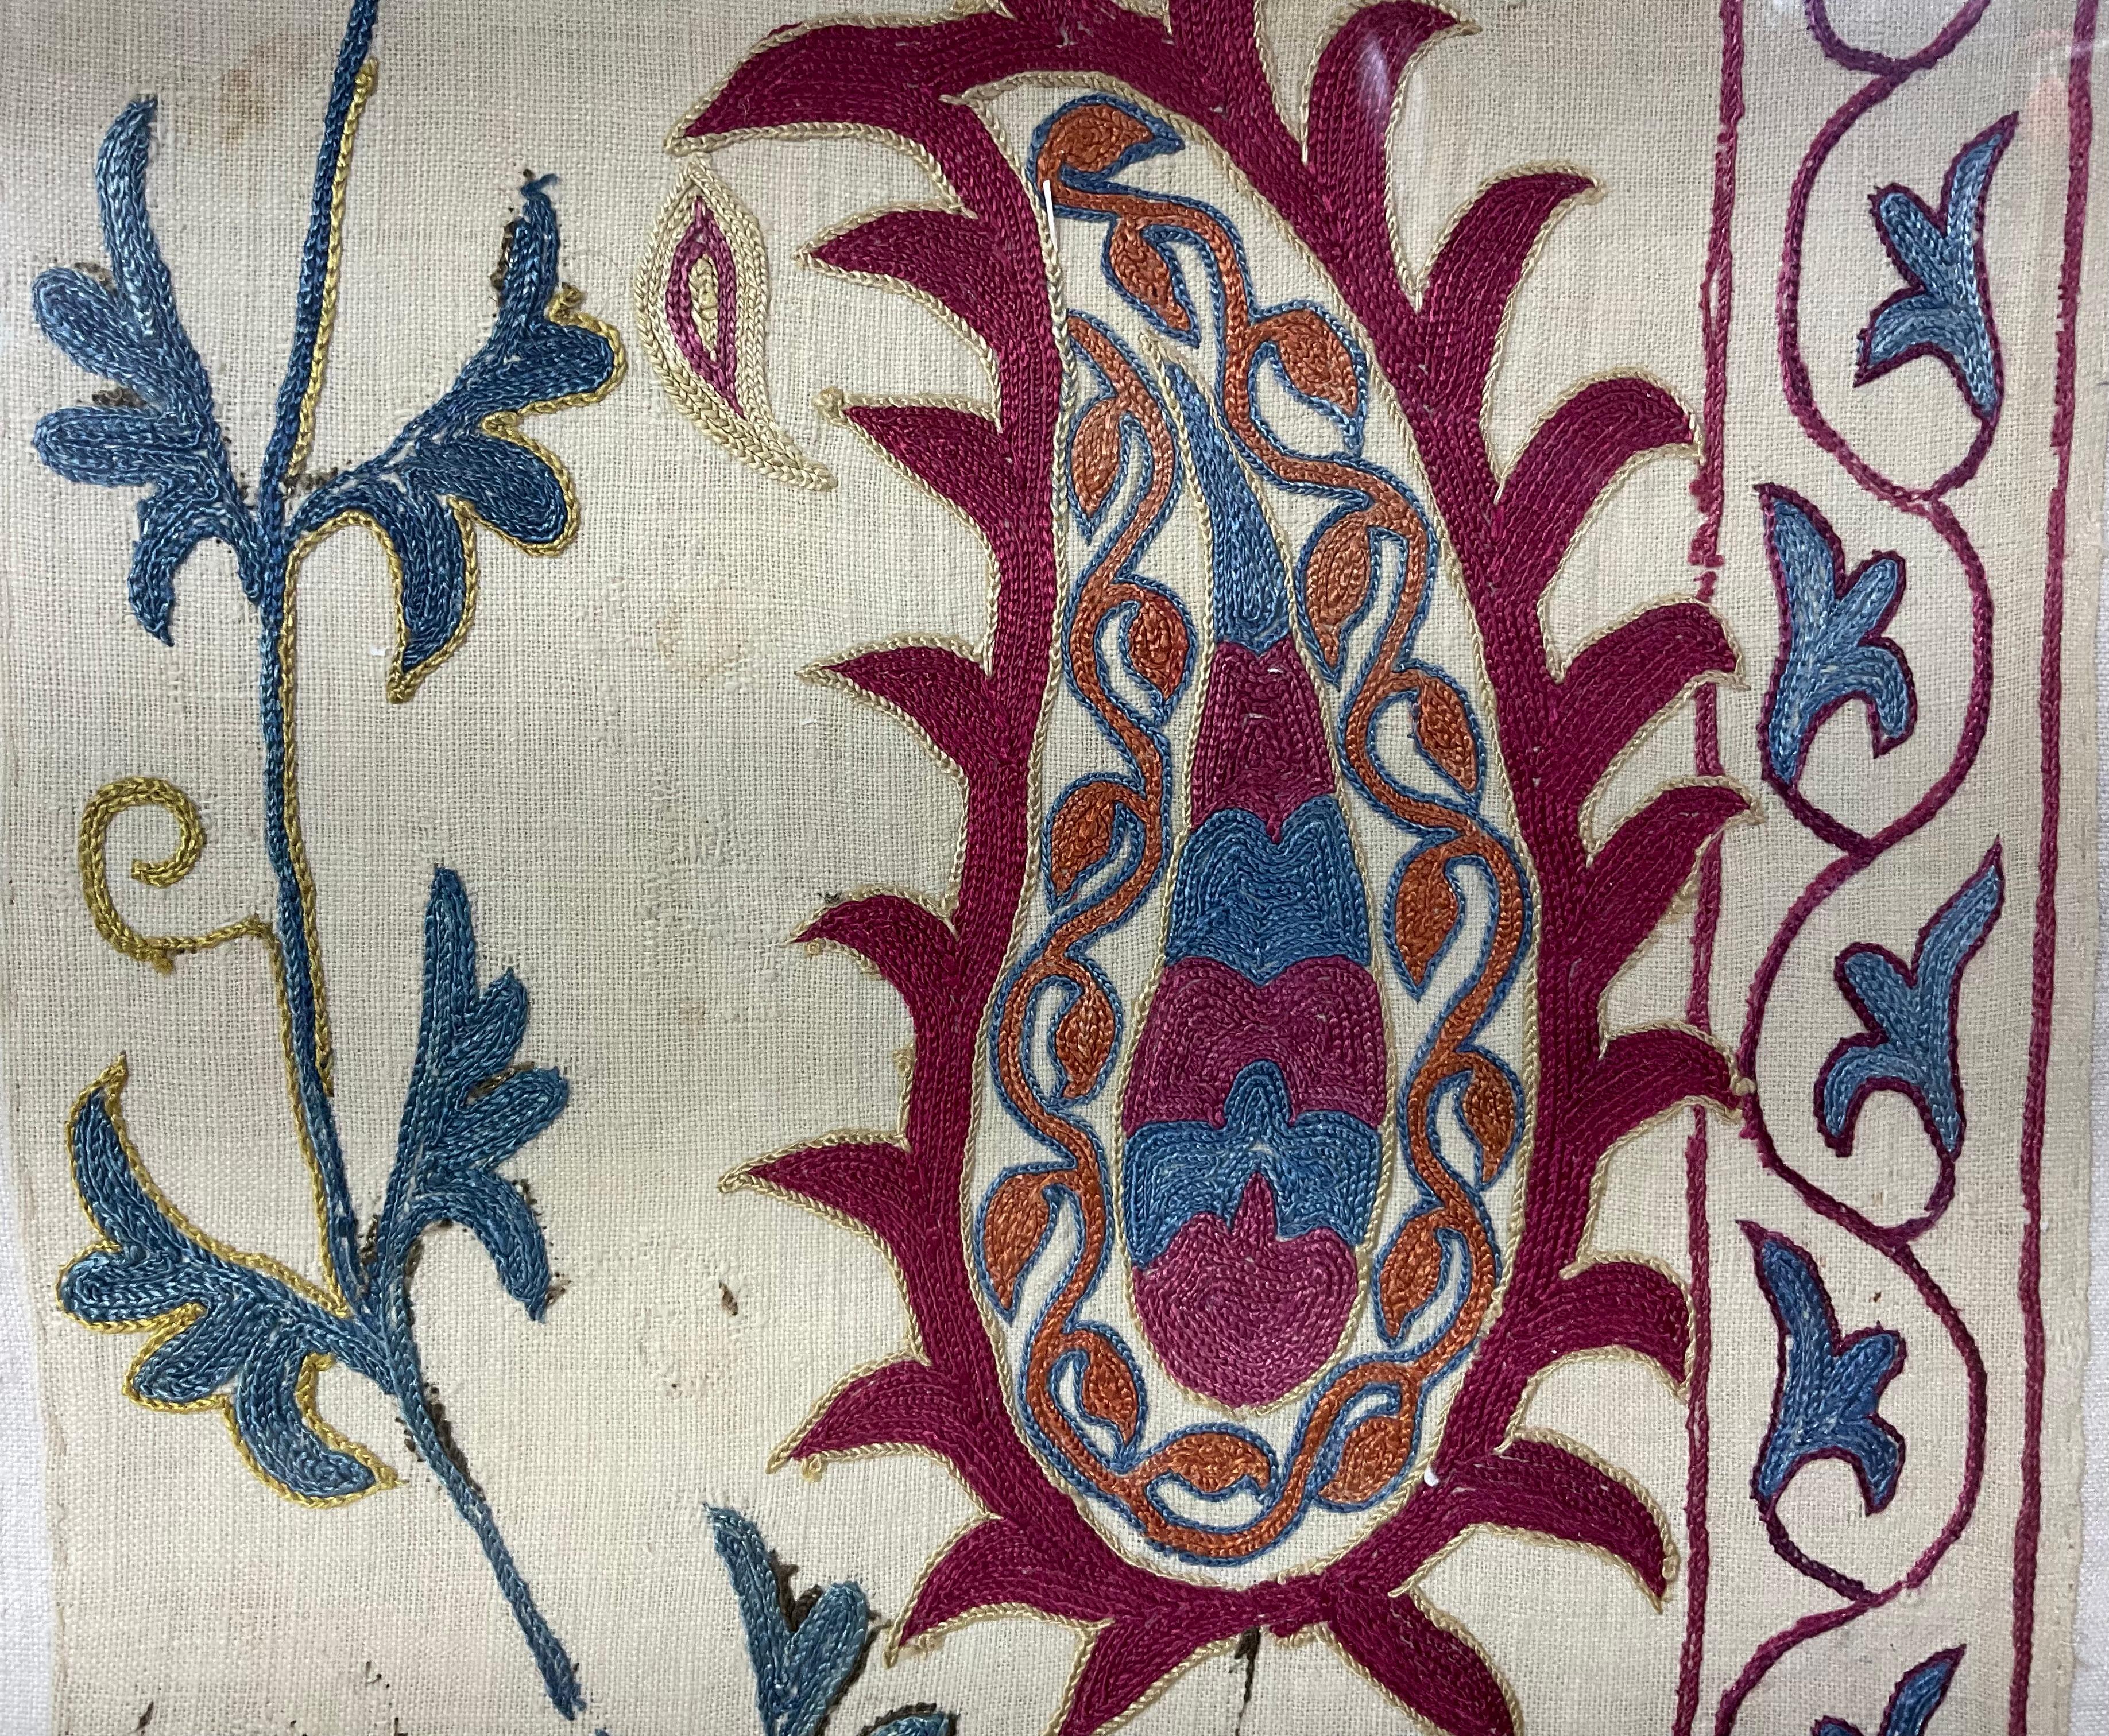 Single 19 Century Antique Suzani Wall Hanging In Good Condition For Sale In Delray Beach, FL